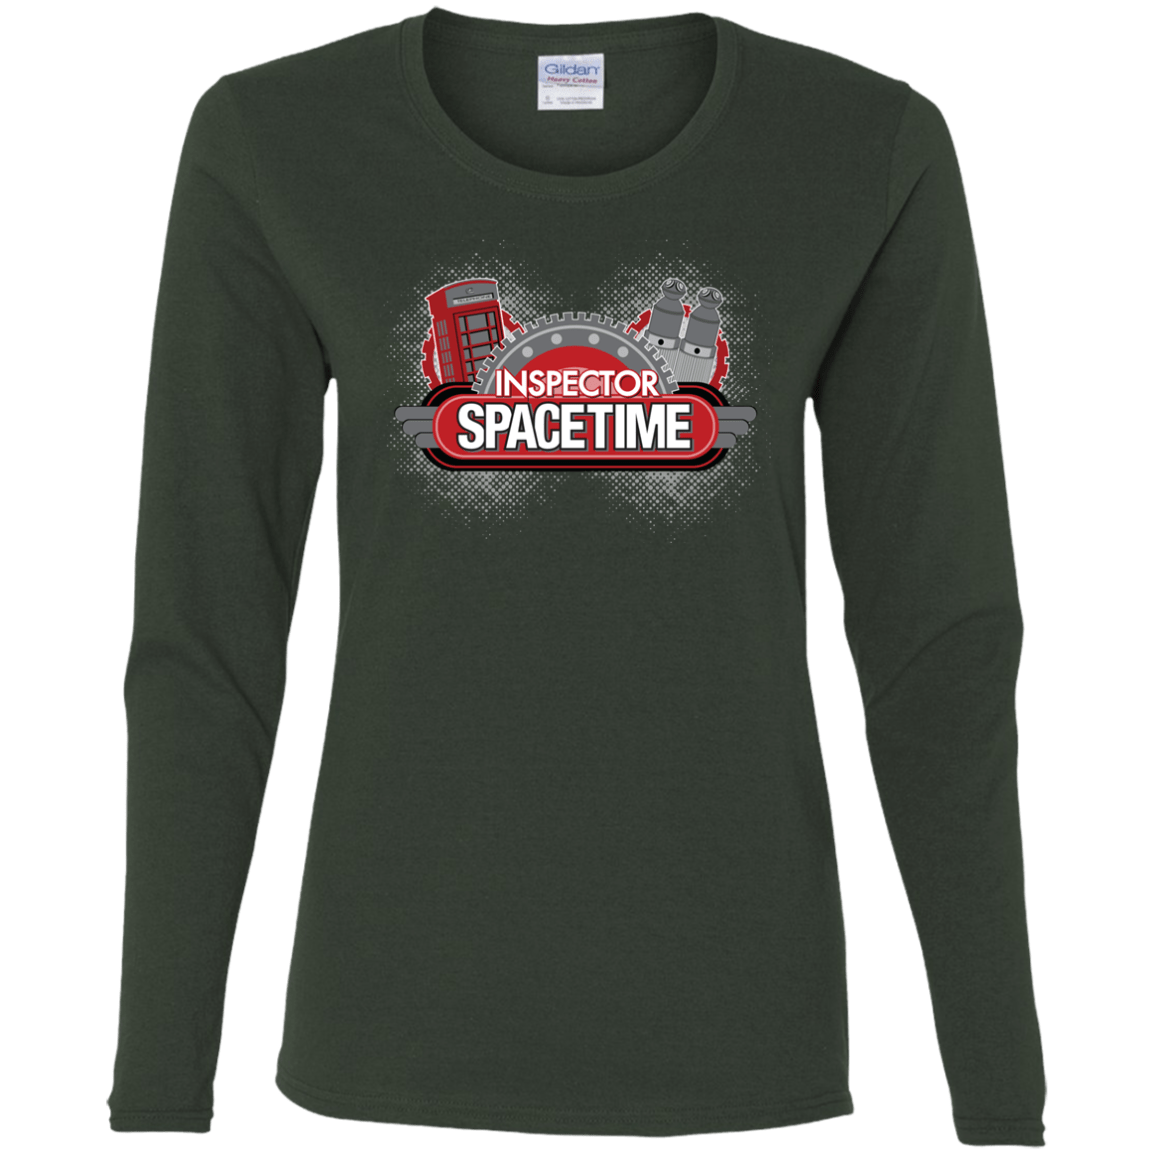 T-Shirts Forest / S Inspector Spacetime Women's Long Sleeve T-Shirt